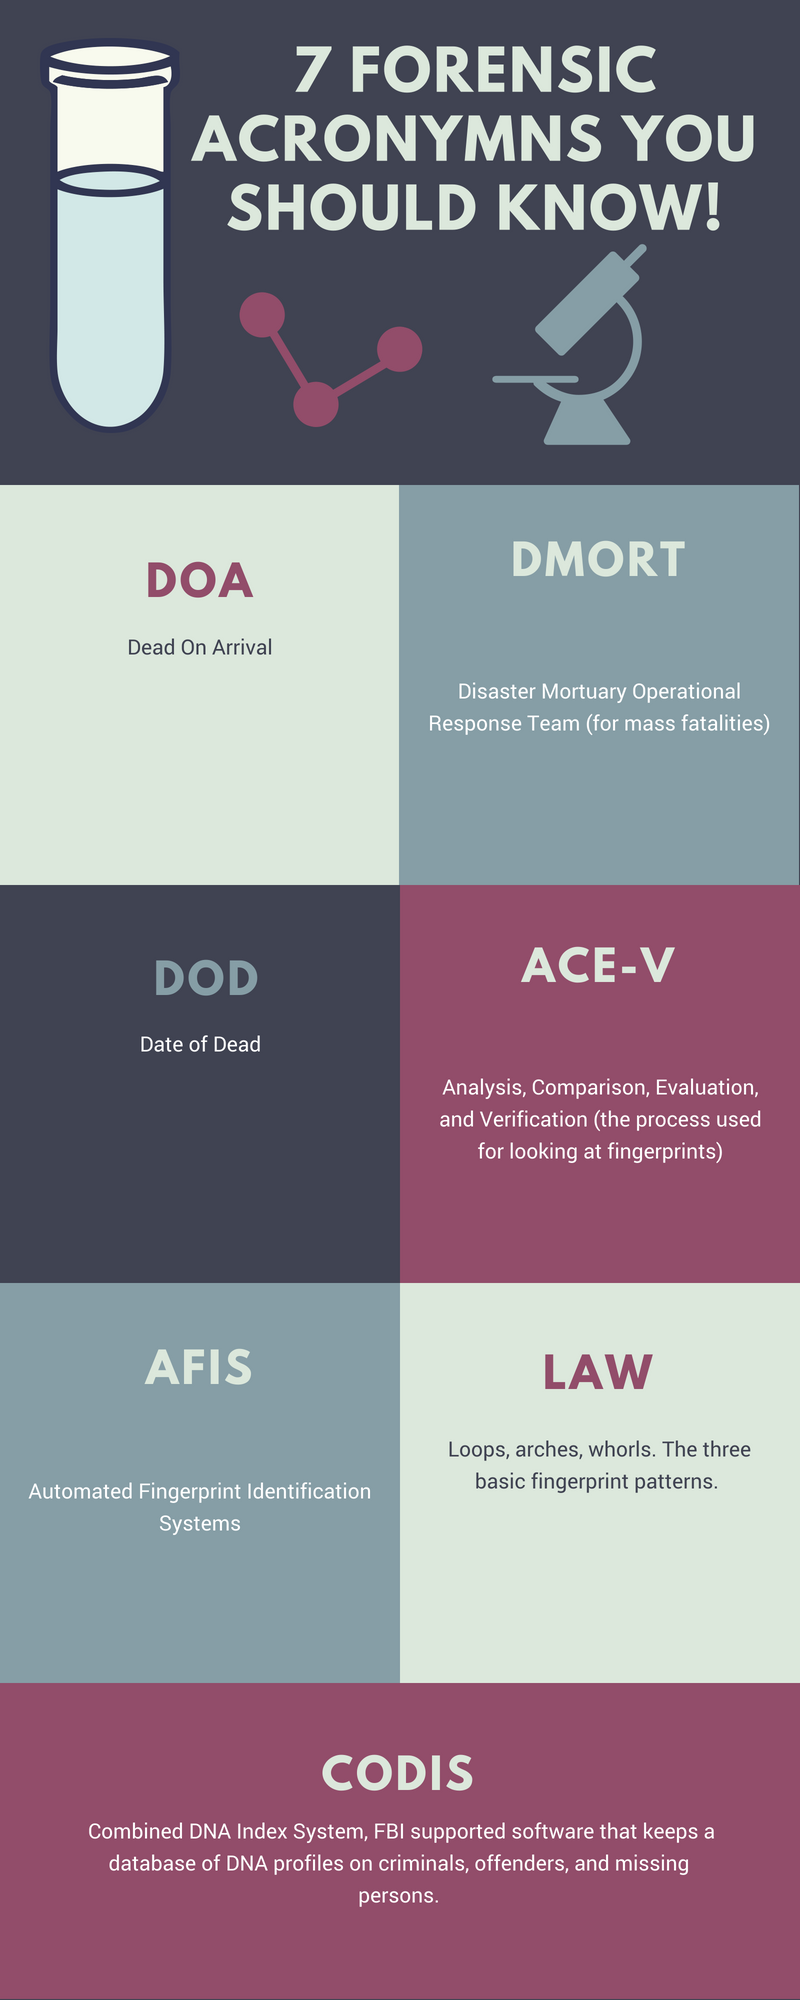 7 Forensic Acronymns you should know!1.png